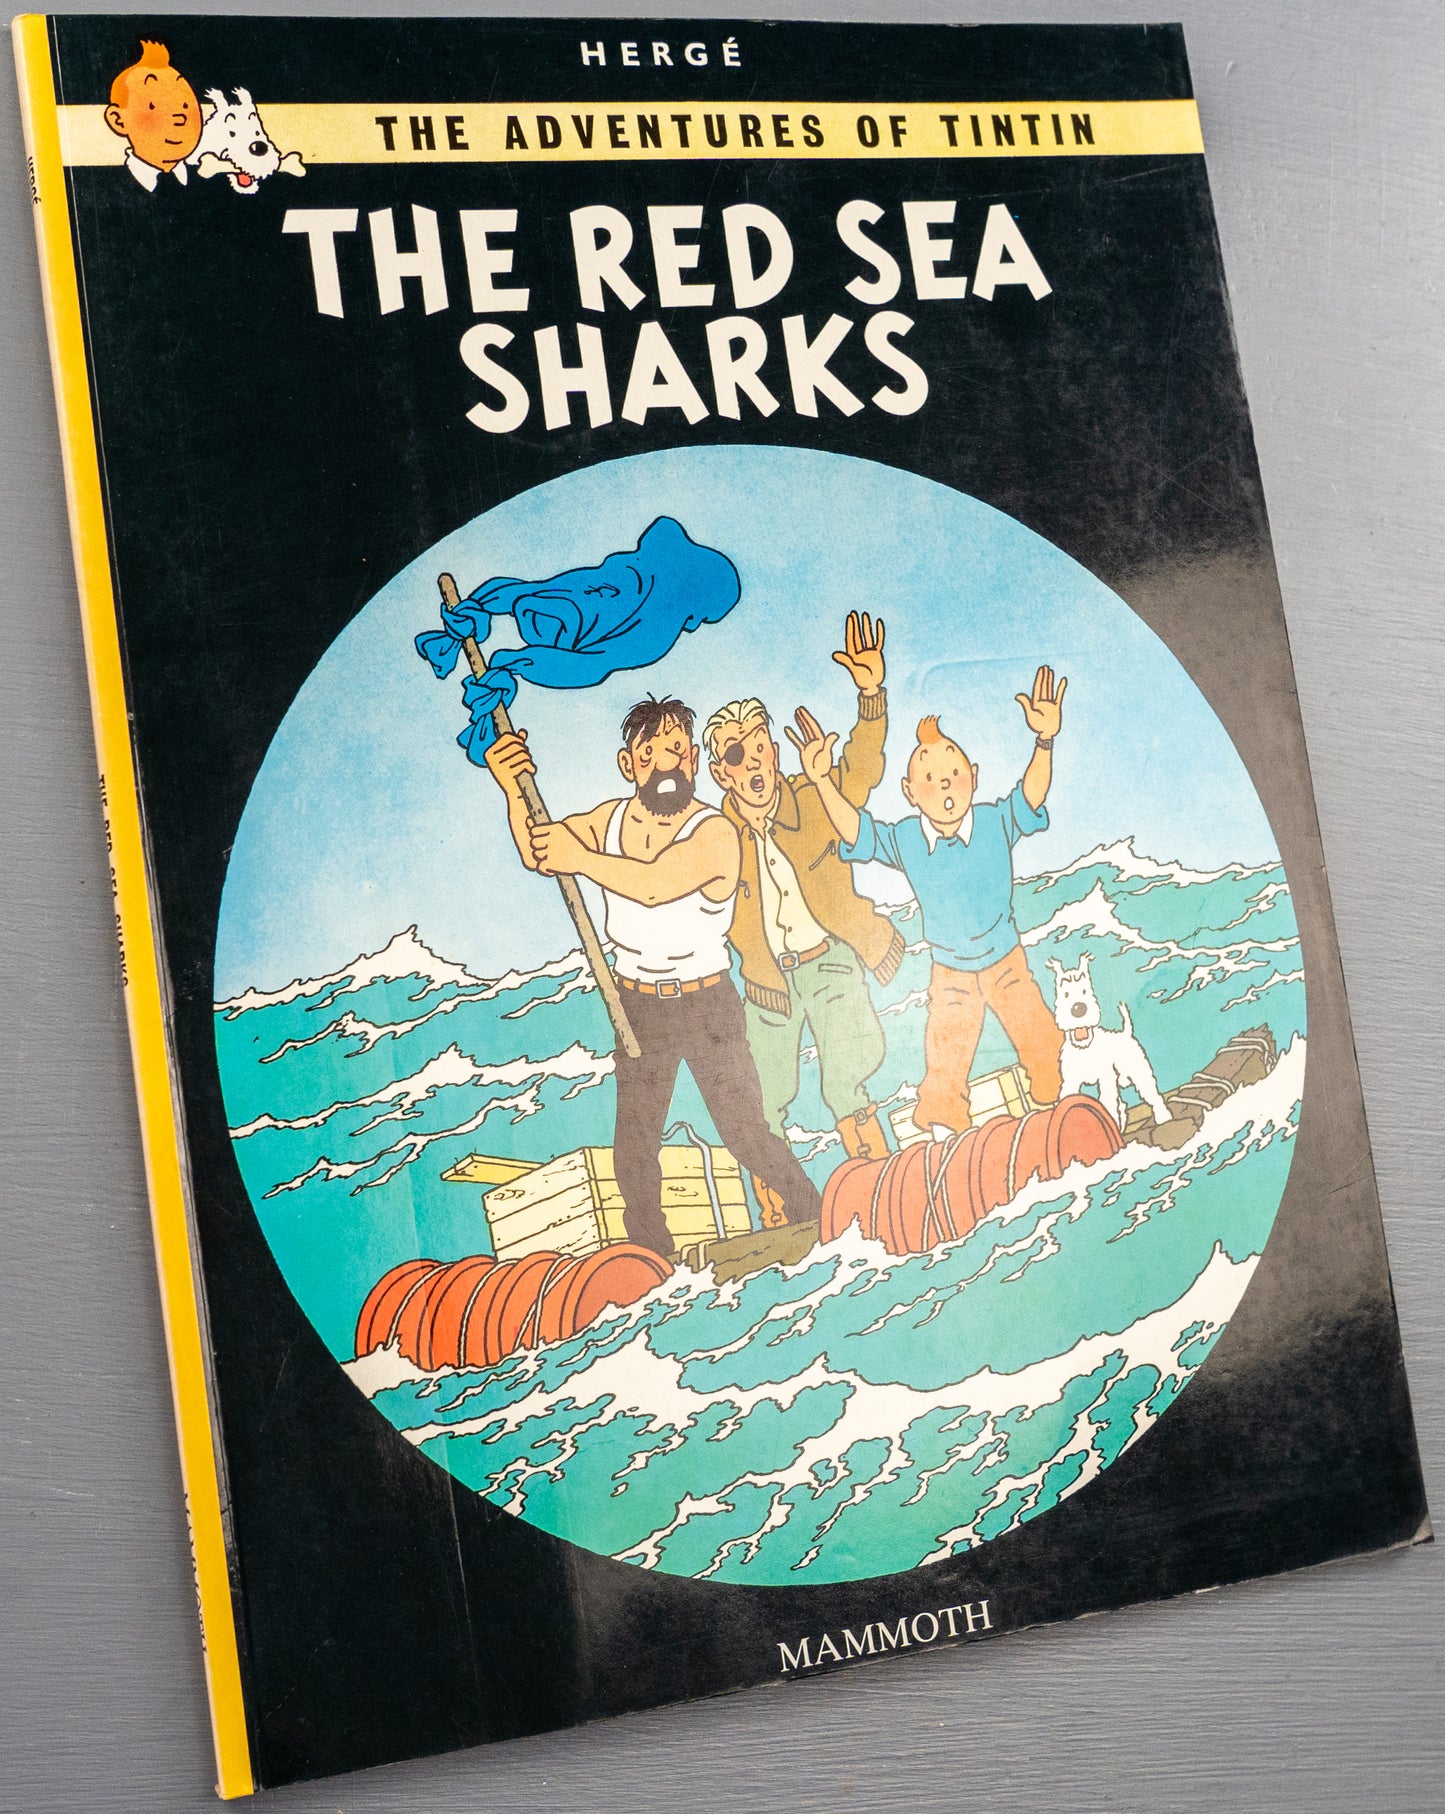 The Red Sea Sharks - Tintin Mammoth UK Paperback Edition Book 1990s